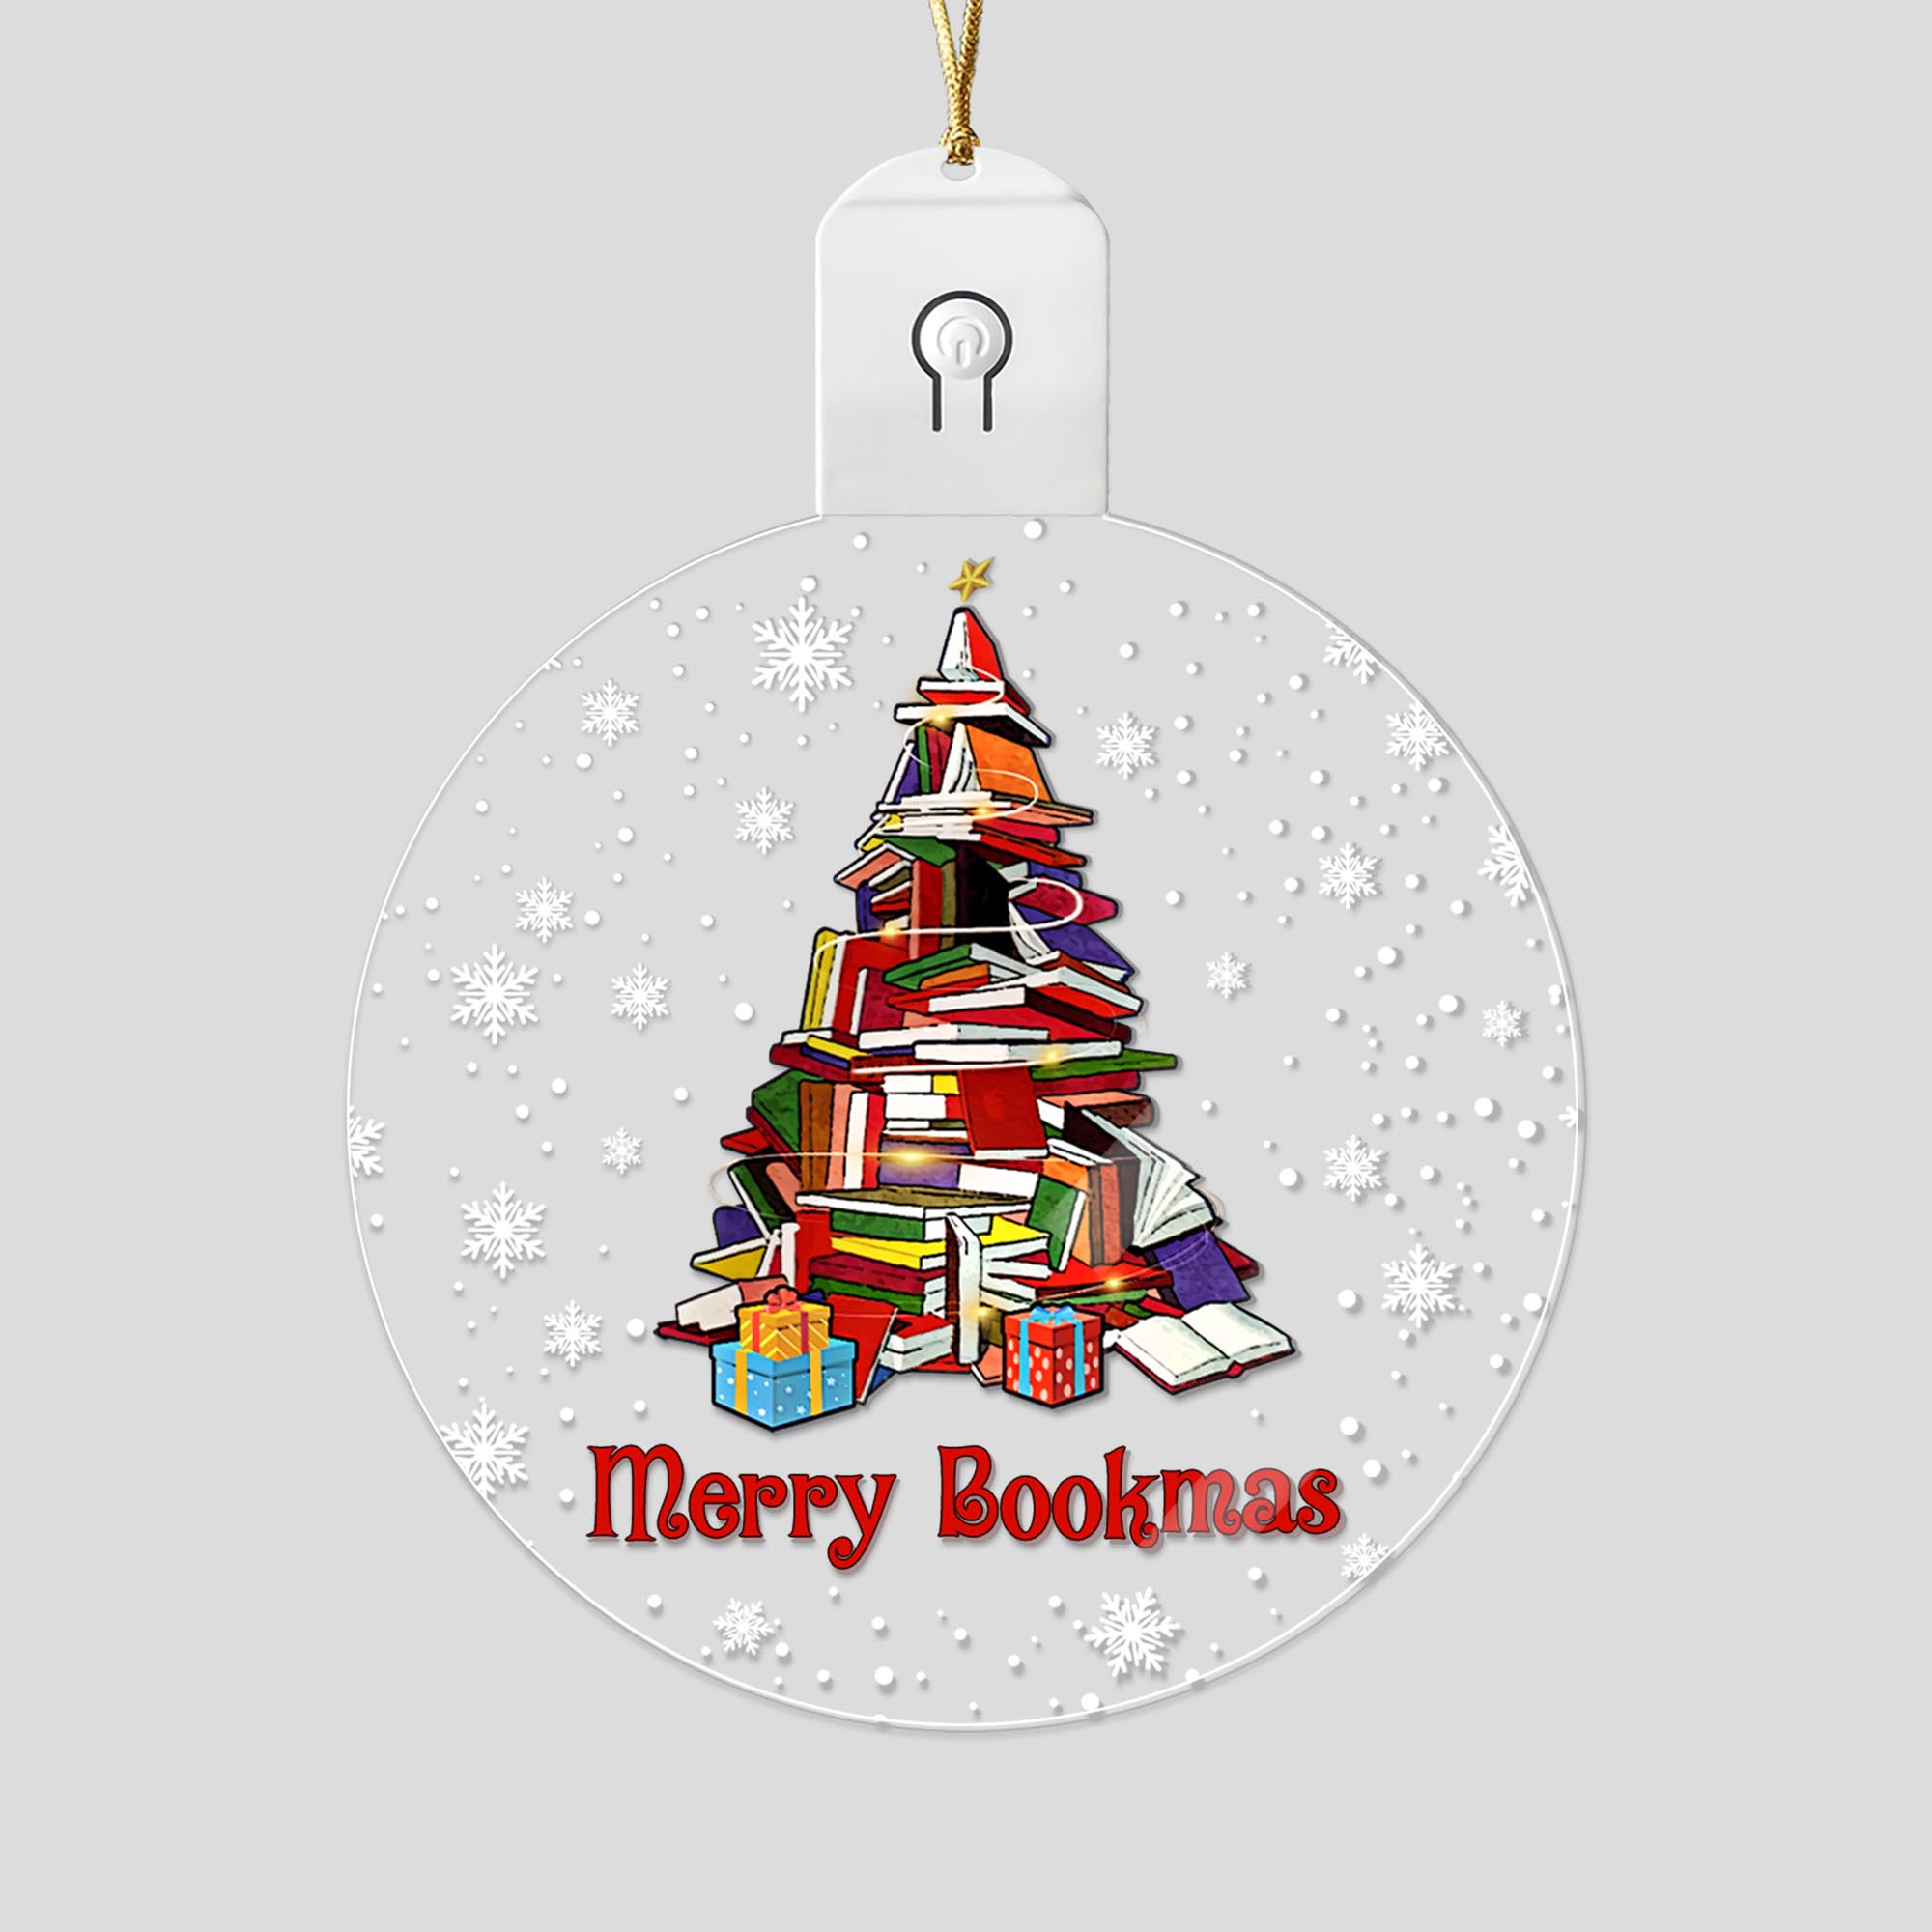 Book Lovers Ornament Acrylic Reading Book Globe Ornament Love Bookish Decor Librarian Gifts for Christmas Holiday New Year Party Xmas Tree